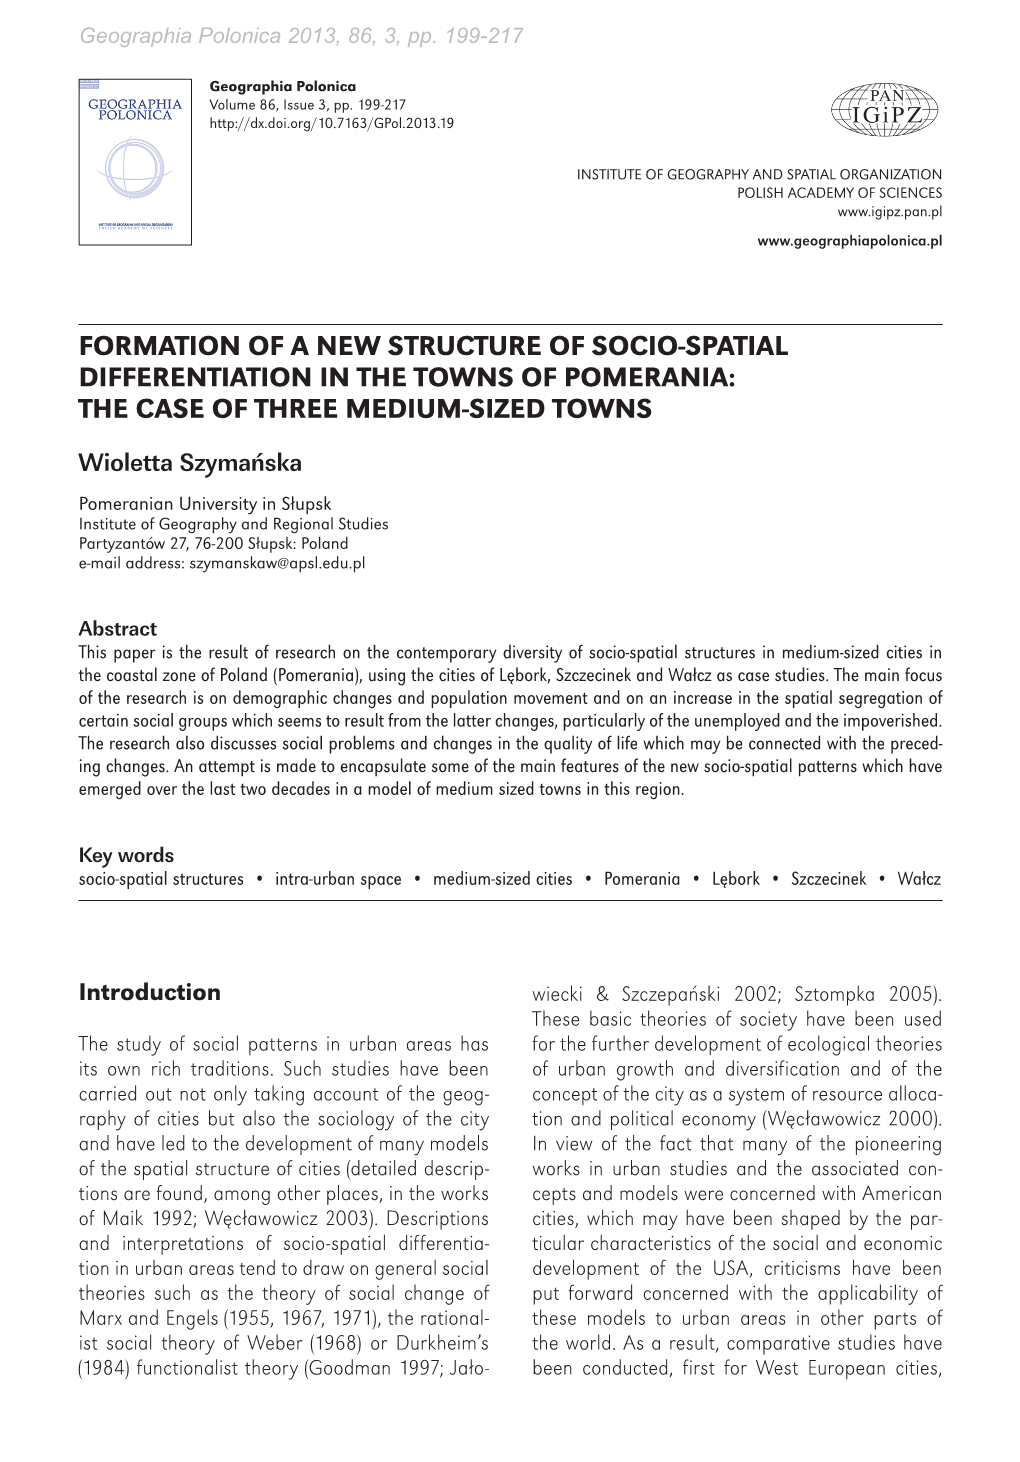 Formation of a New Structure of Socio-Spatial Differentiation in the Towns of Pomerania: the Case of Three Medium-Sized Towns